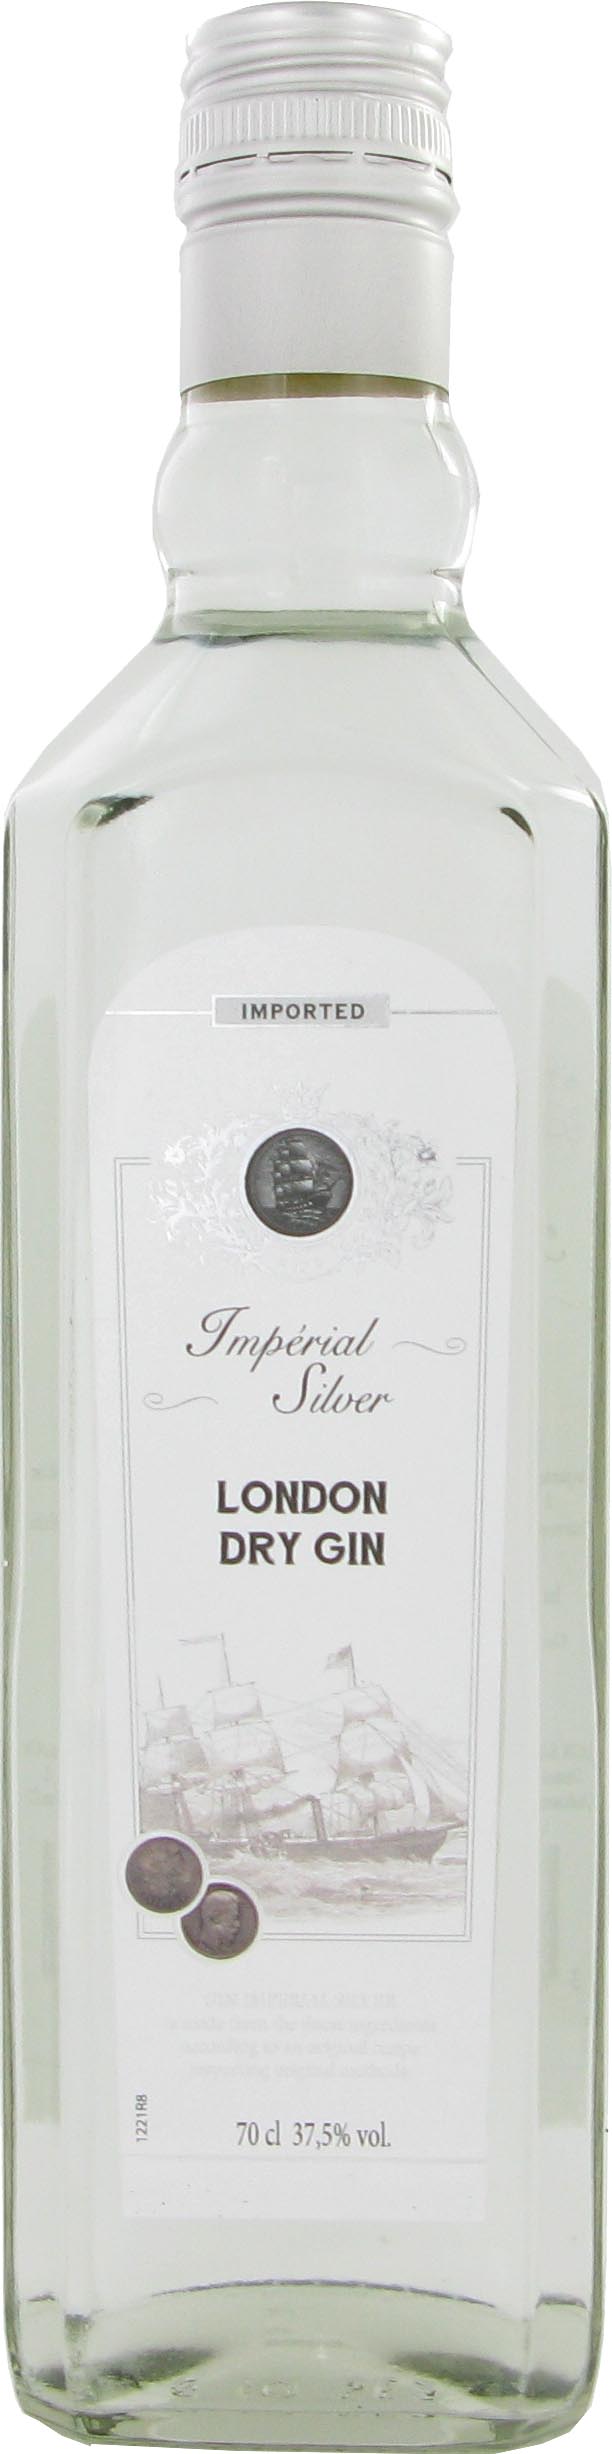 GIN IMPERIAL SILVER 70 CL 37,5